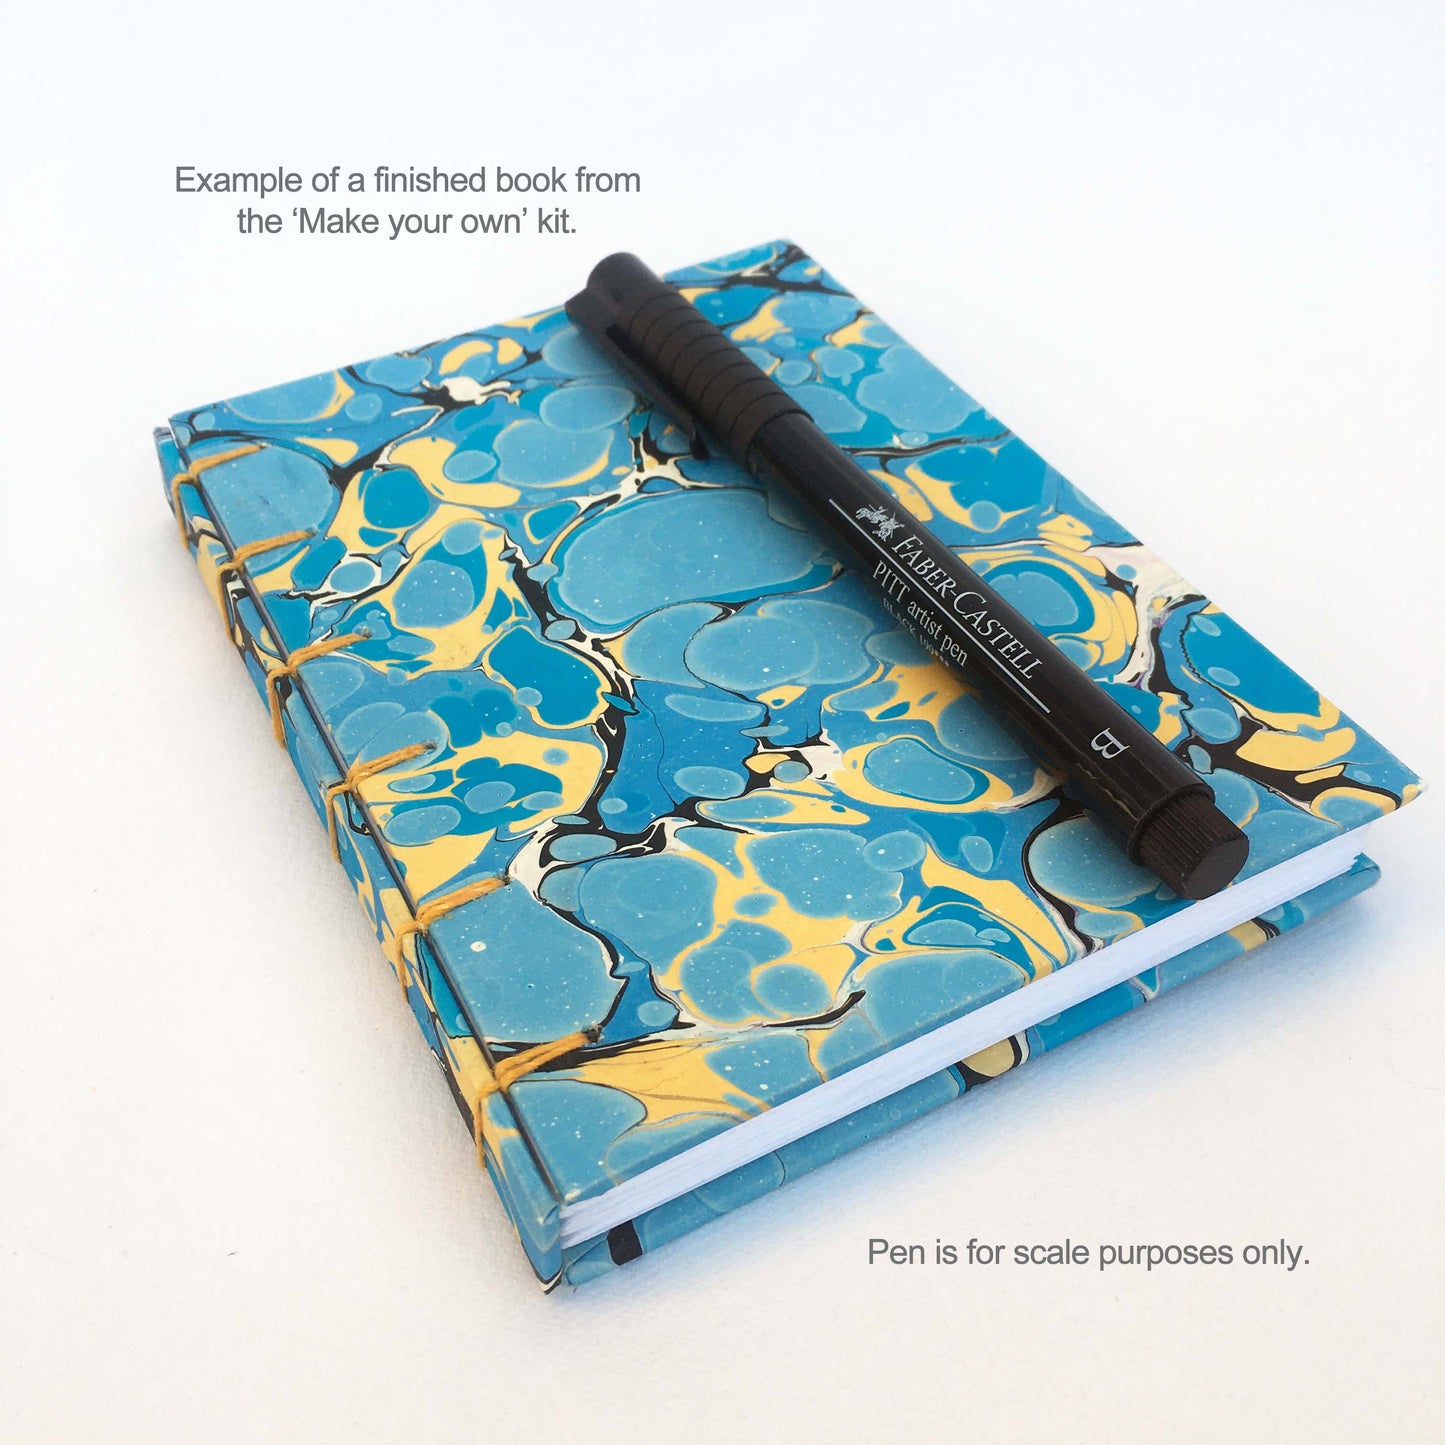 Bookbinding Kit - Make your own book